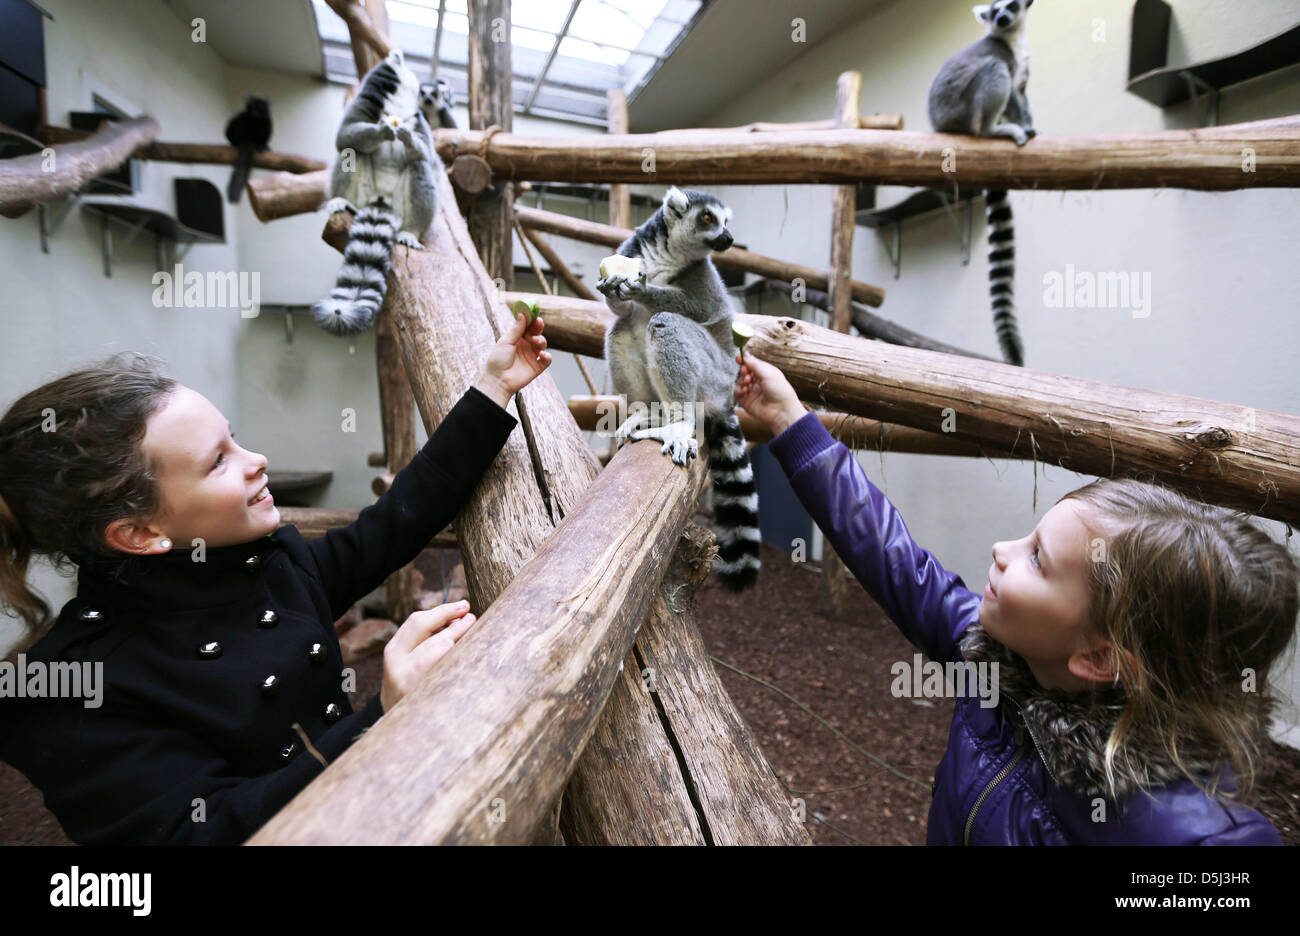 The sisters Anne and Vera Theunissen enjoy feeding the lemures with snacks at Burgers' Zoo in Arnhem, Netherlands on November 13,2012. The zoo invited the girls to feed the animals by hand because they raised a smart question about those prosimians. Photo: Vidiphoto Stock Photo